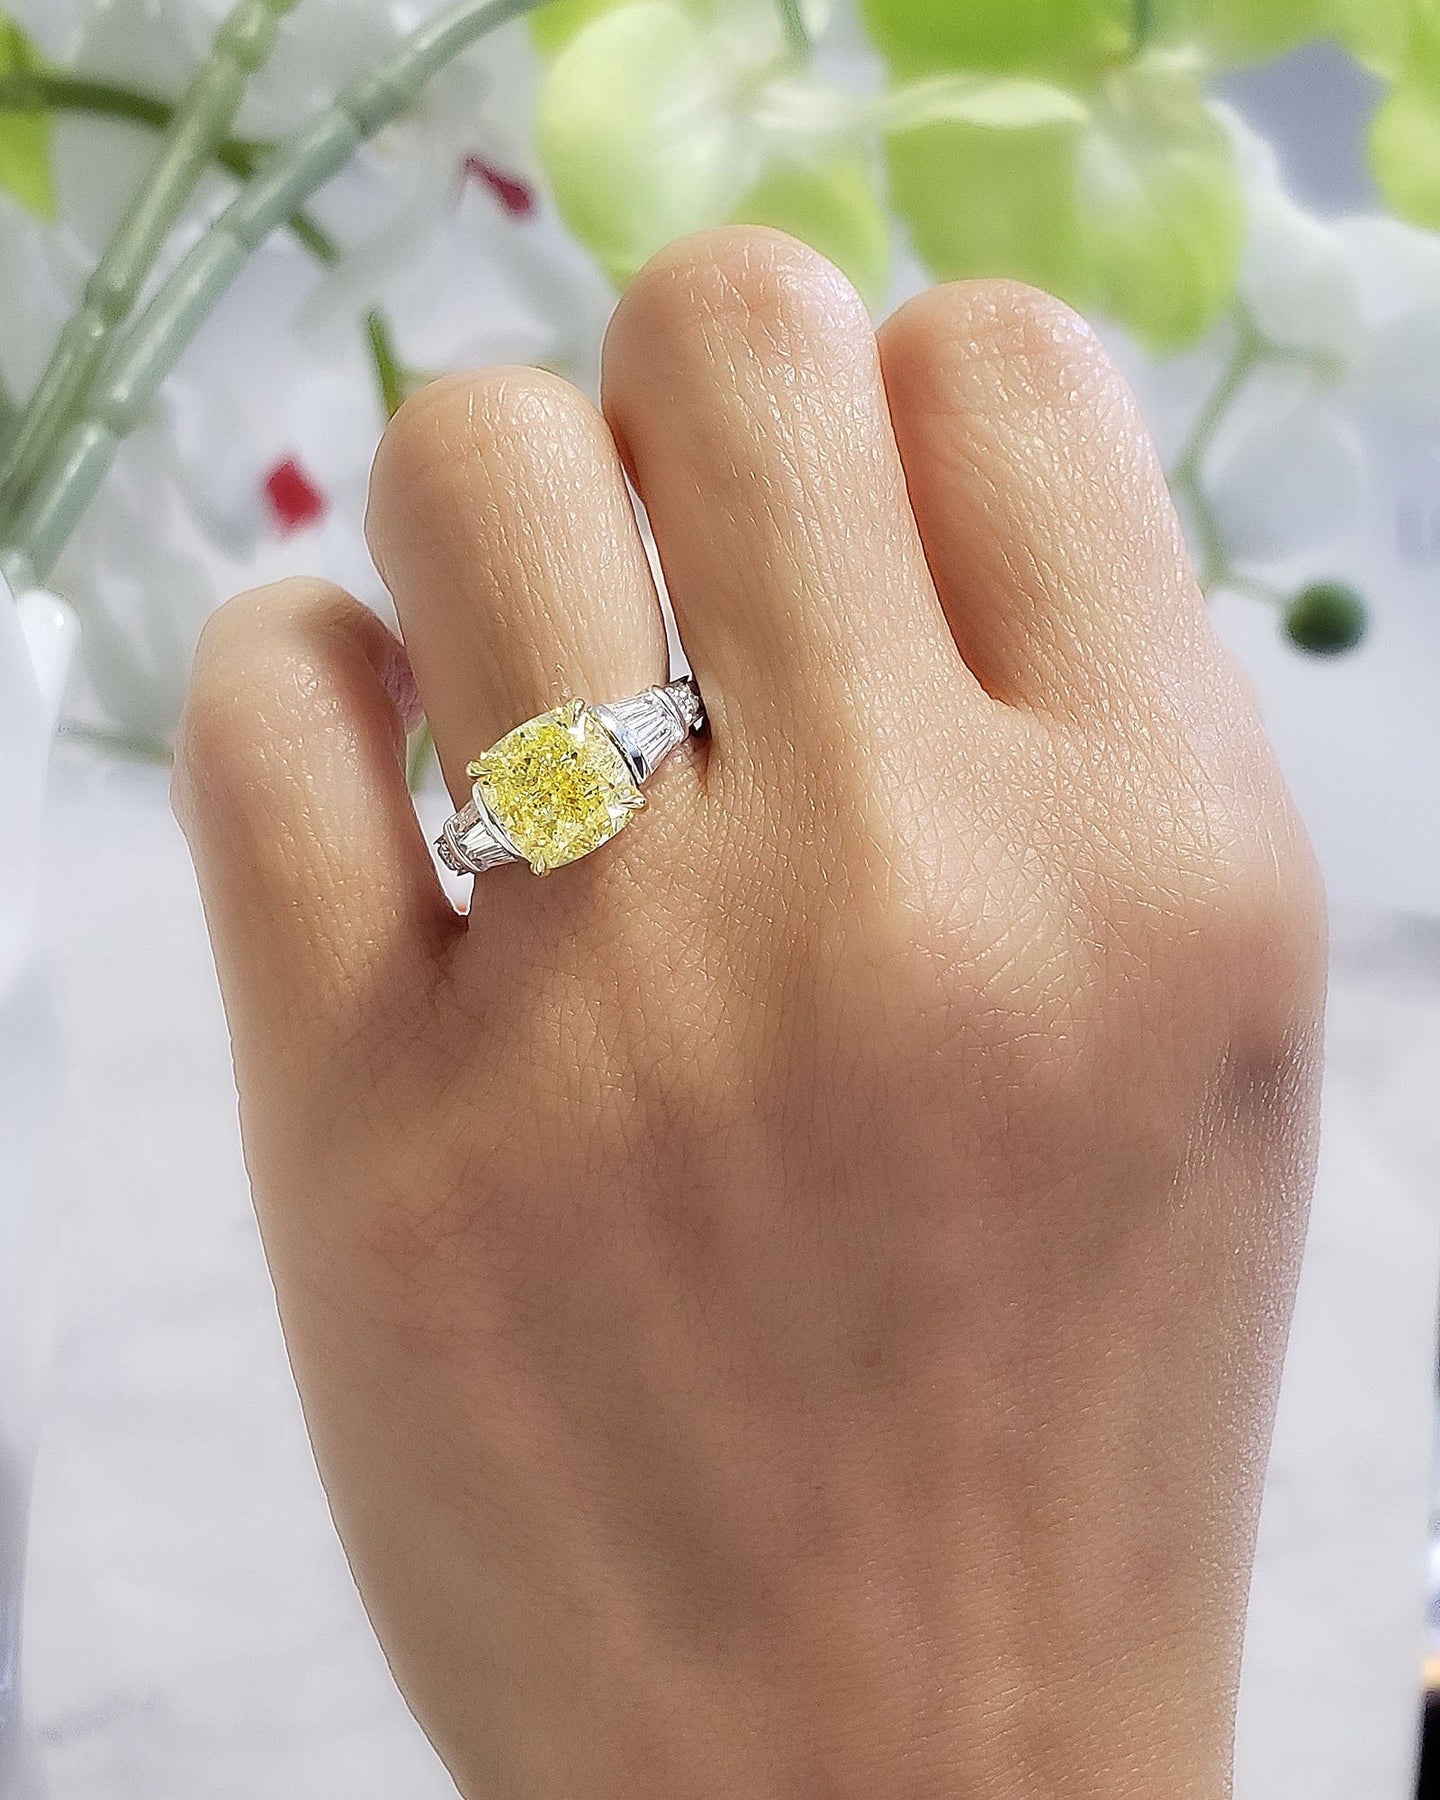 What is a Yellow Diamond?